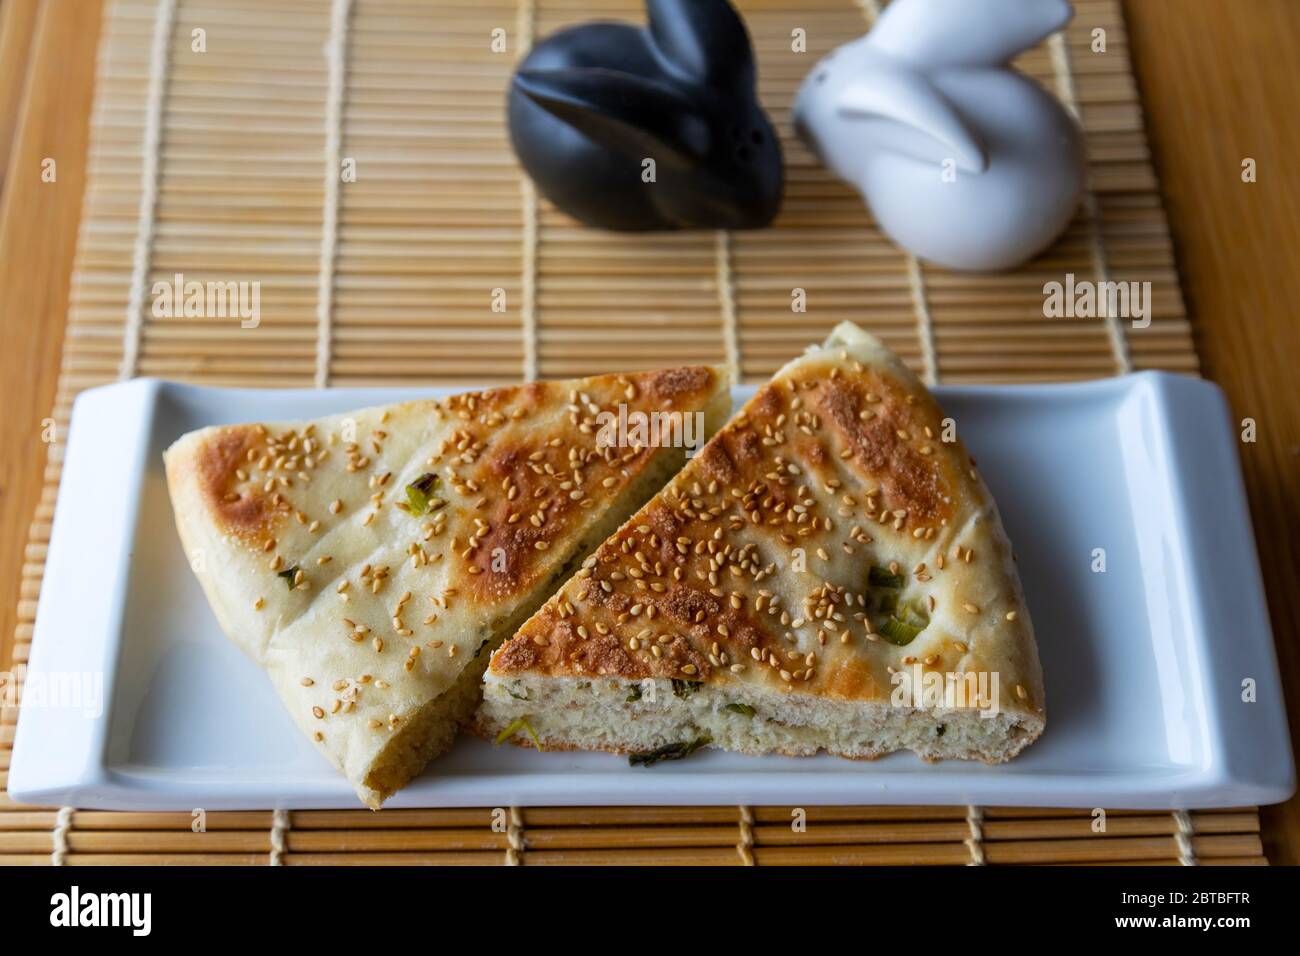 Chinese halal food known as sesame scallion bread, a popular staple in Northern China. The bread is stuffed with spring onions and topped with sesame. Stock Photo